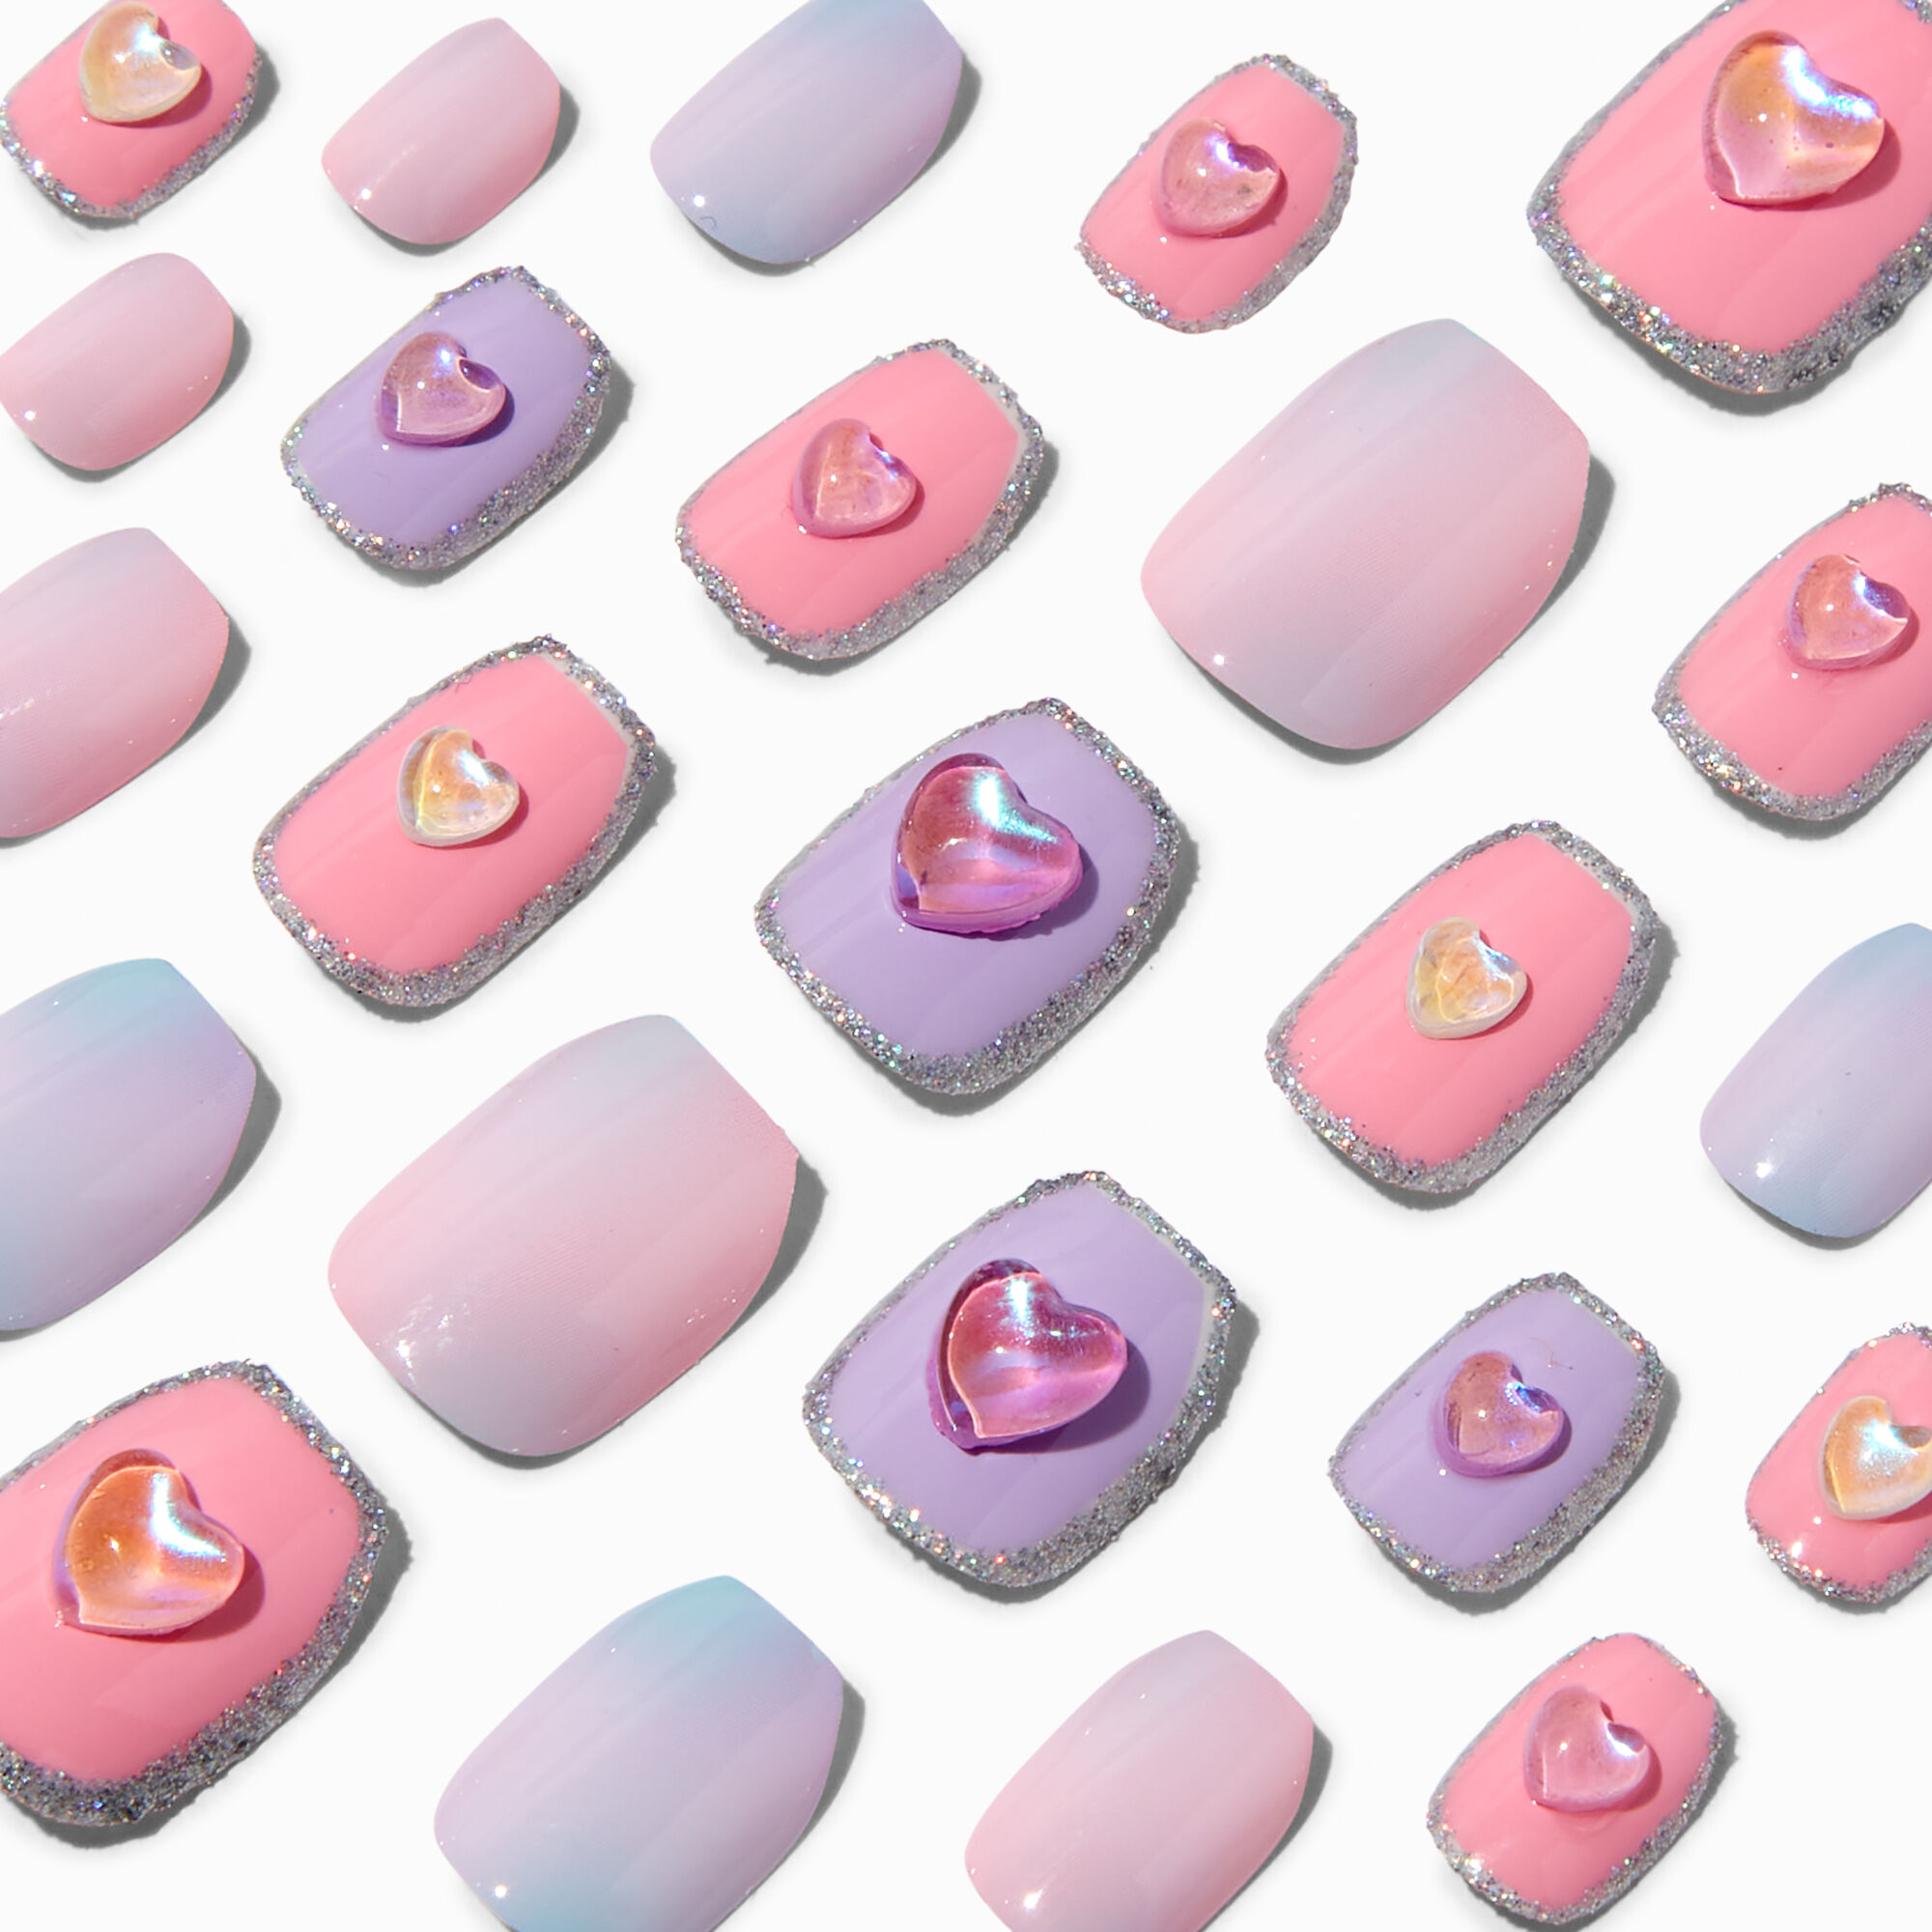 View Claires Pastel Gemstone Hearts Square Vegan Press On Faux Nail Set 24 Pack information